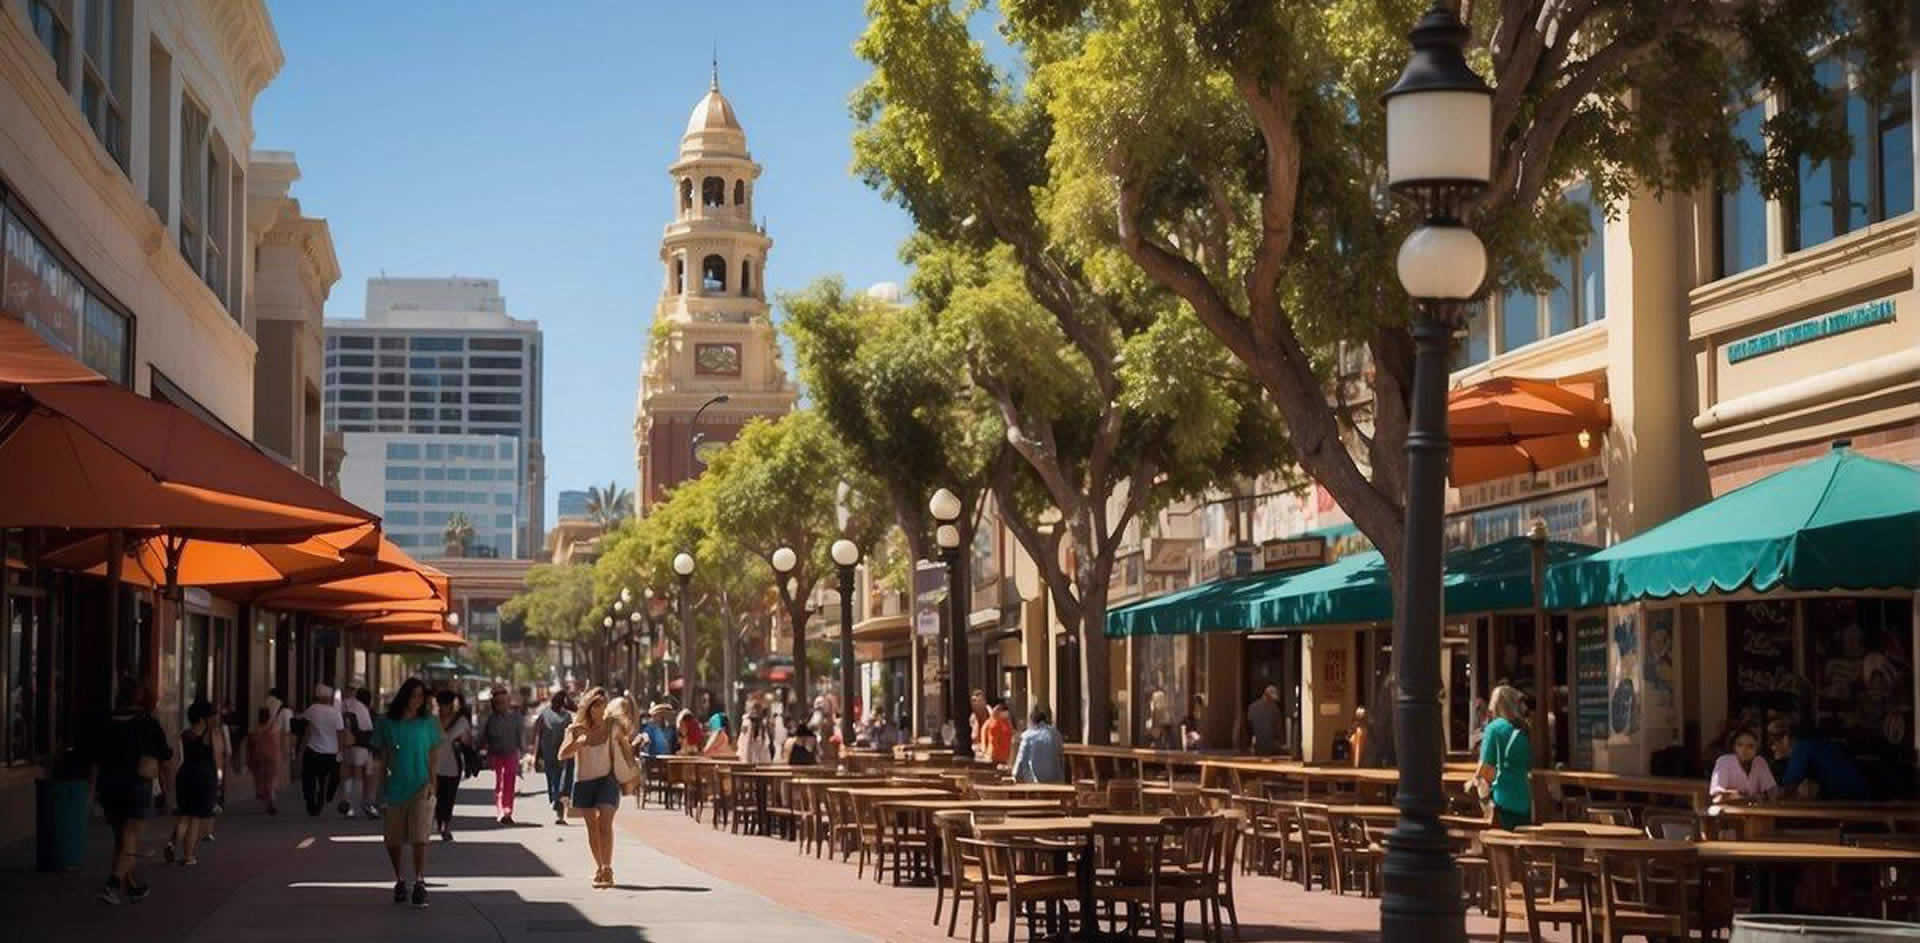 Vibrant Gaslamp Quarter: bustling streets, historic architecture, lively bars, and diverse restaurants. Cultural hotspots like the San Diego Chinese Historical Museum and educational experiences at the New Children's Museum